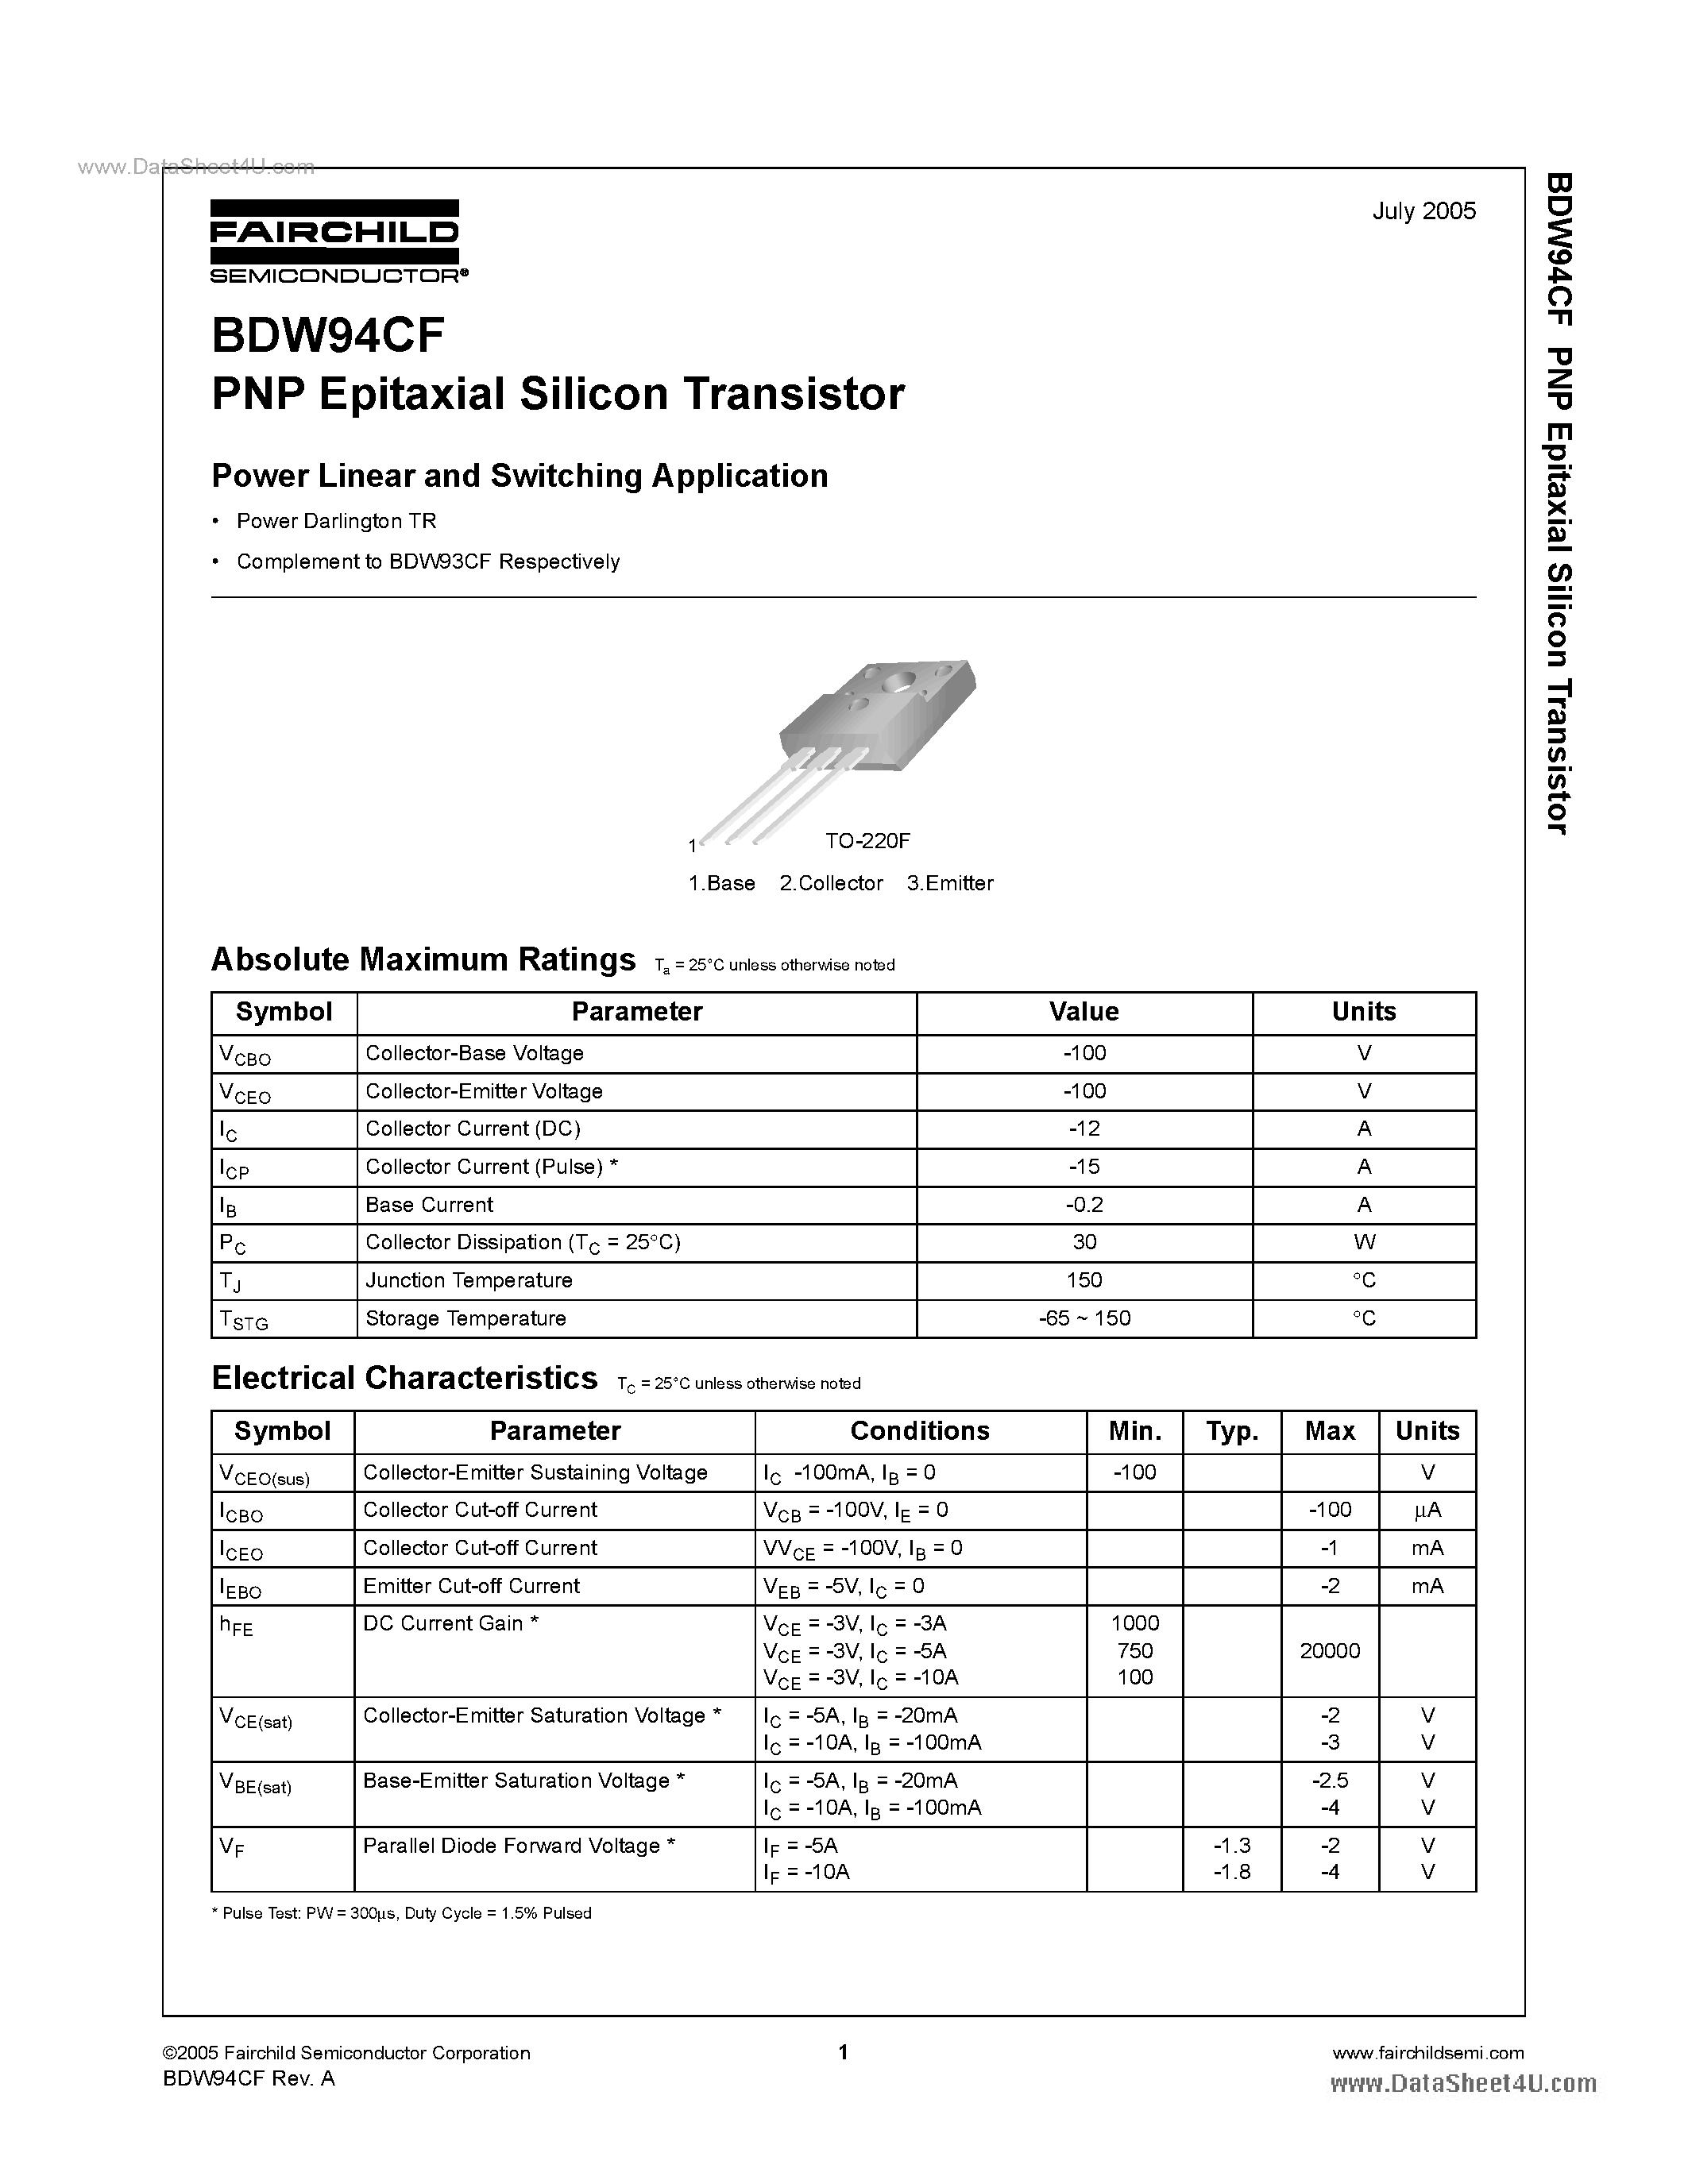 Даташит BDW94CF - PNP Epitaxial Silicon Transistor страница 1